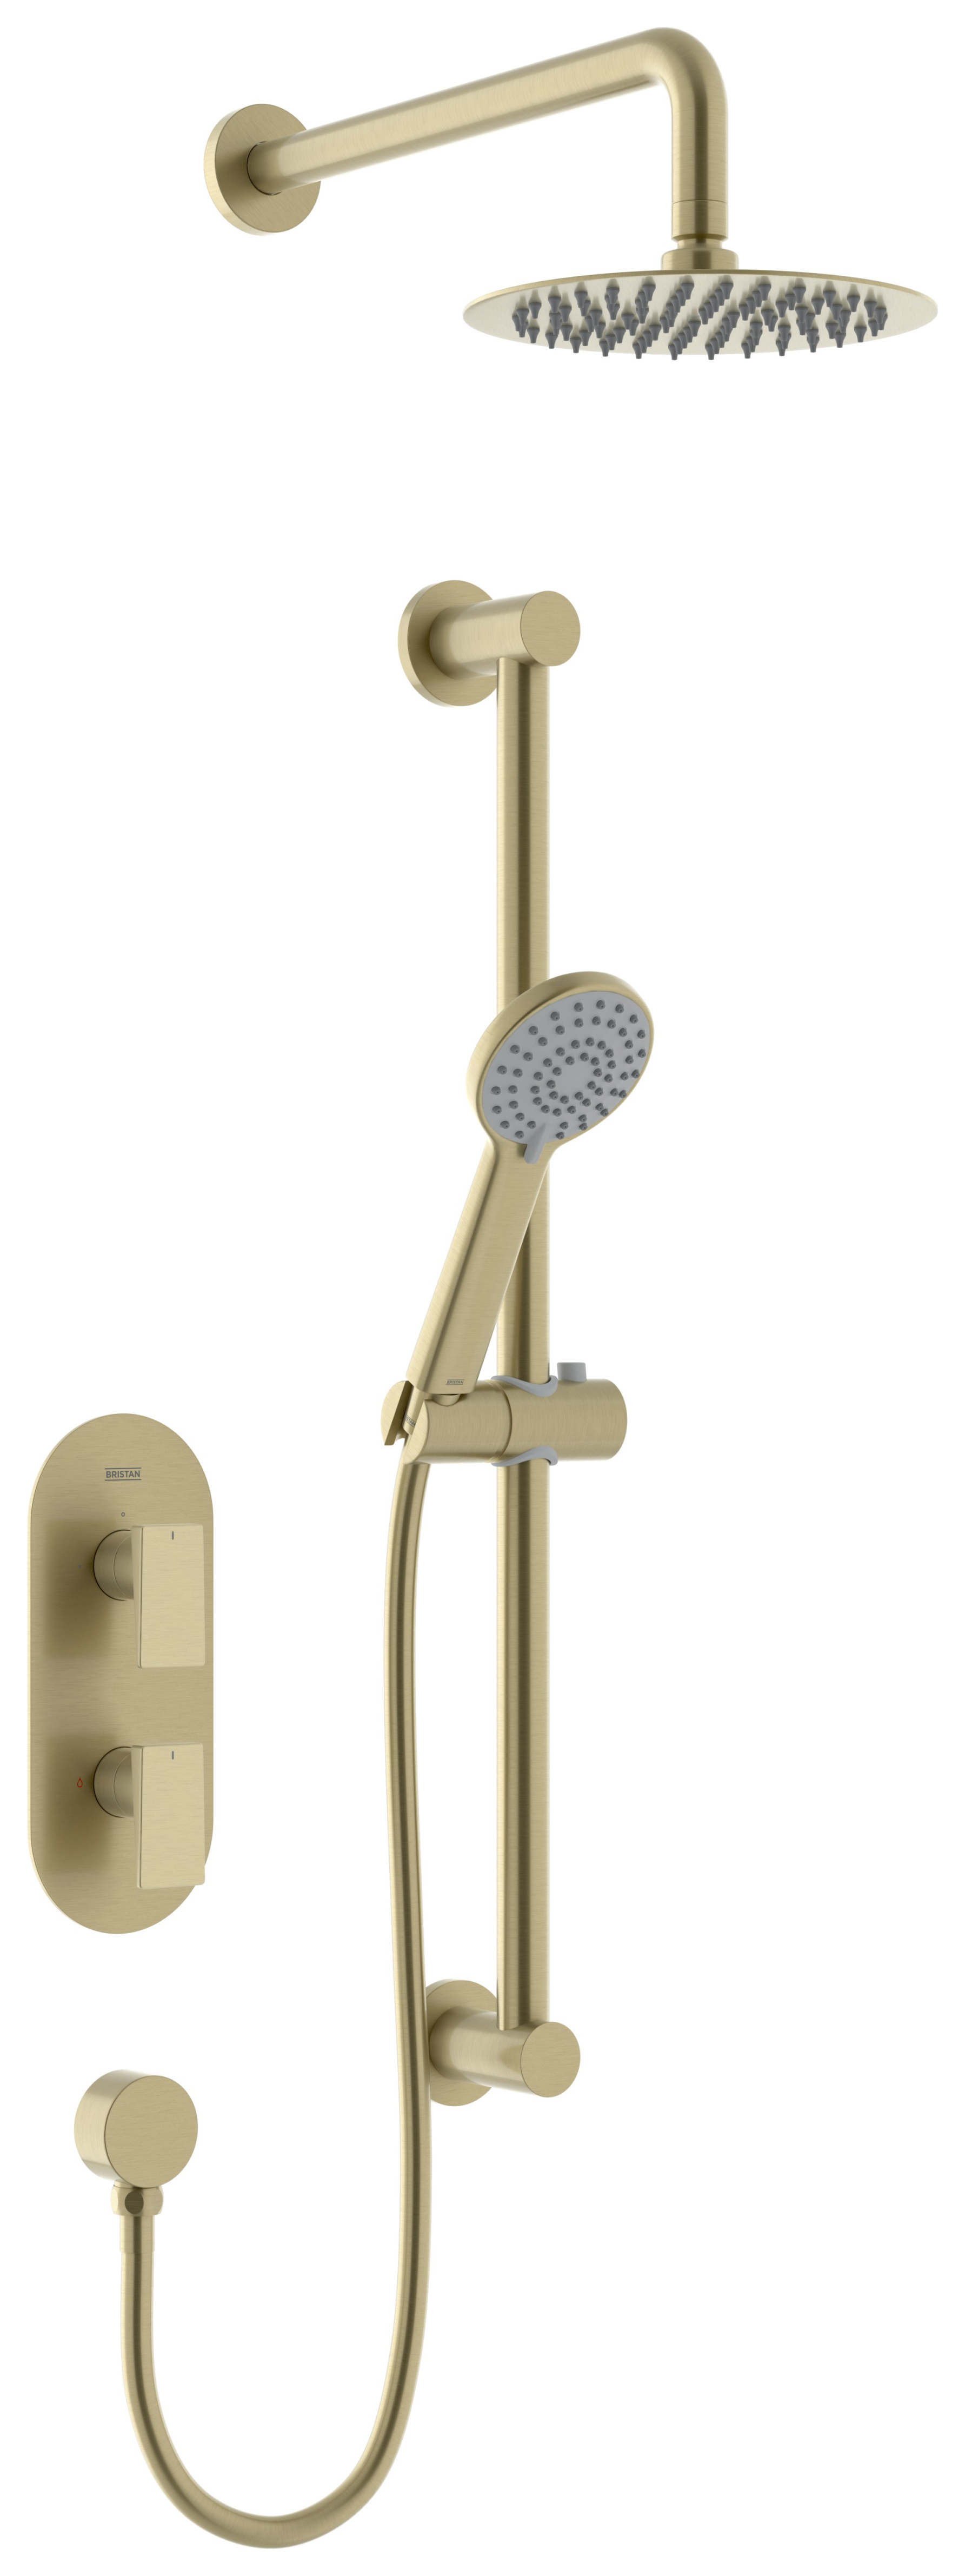 Bristan Frammento Recessed Dual Control Mixer Shower - Brushed Brass